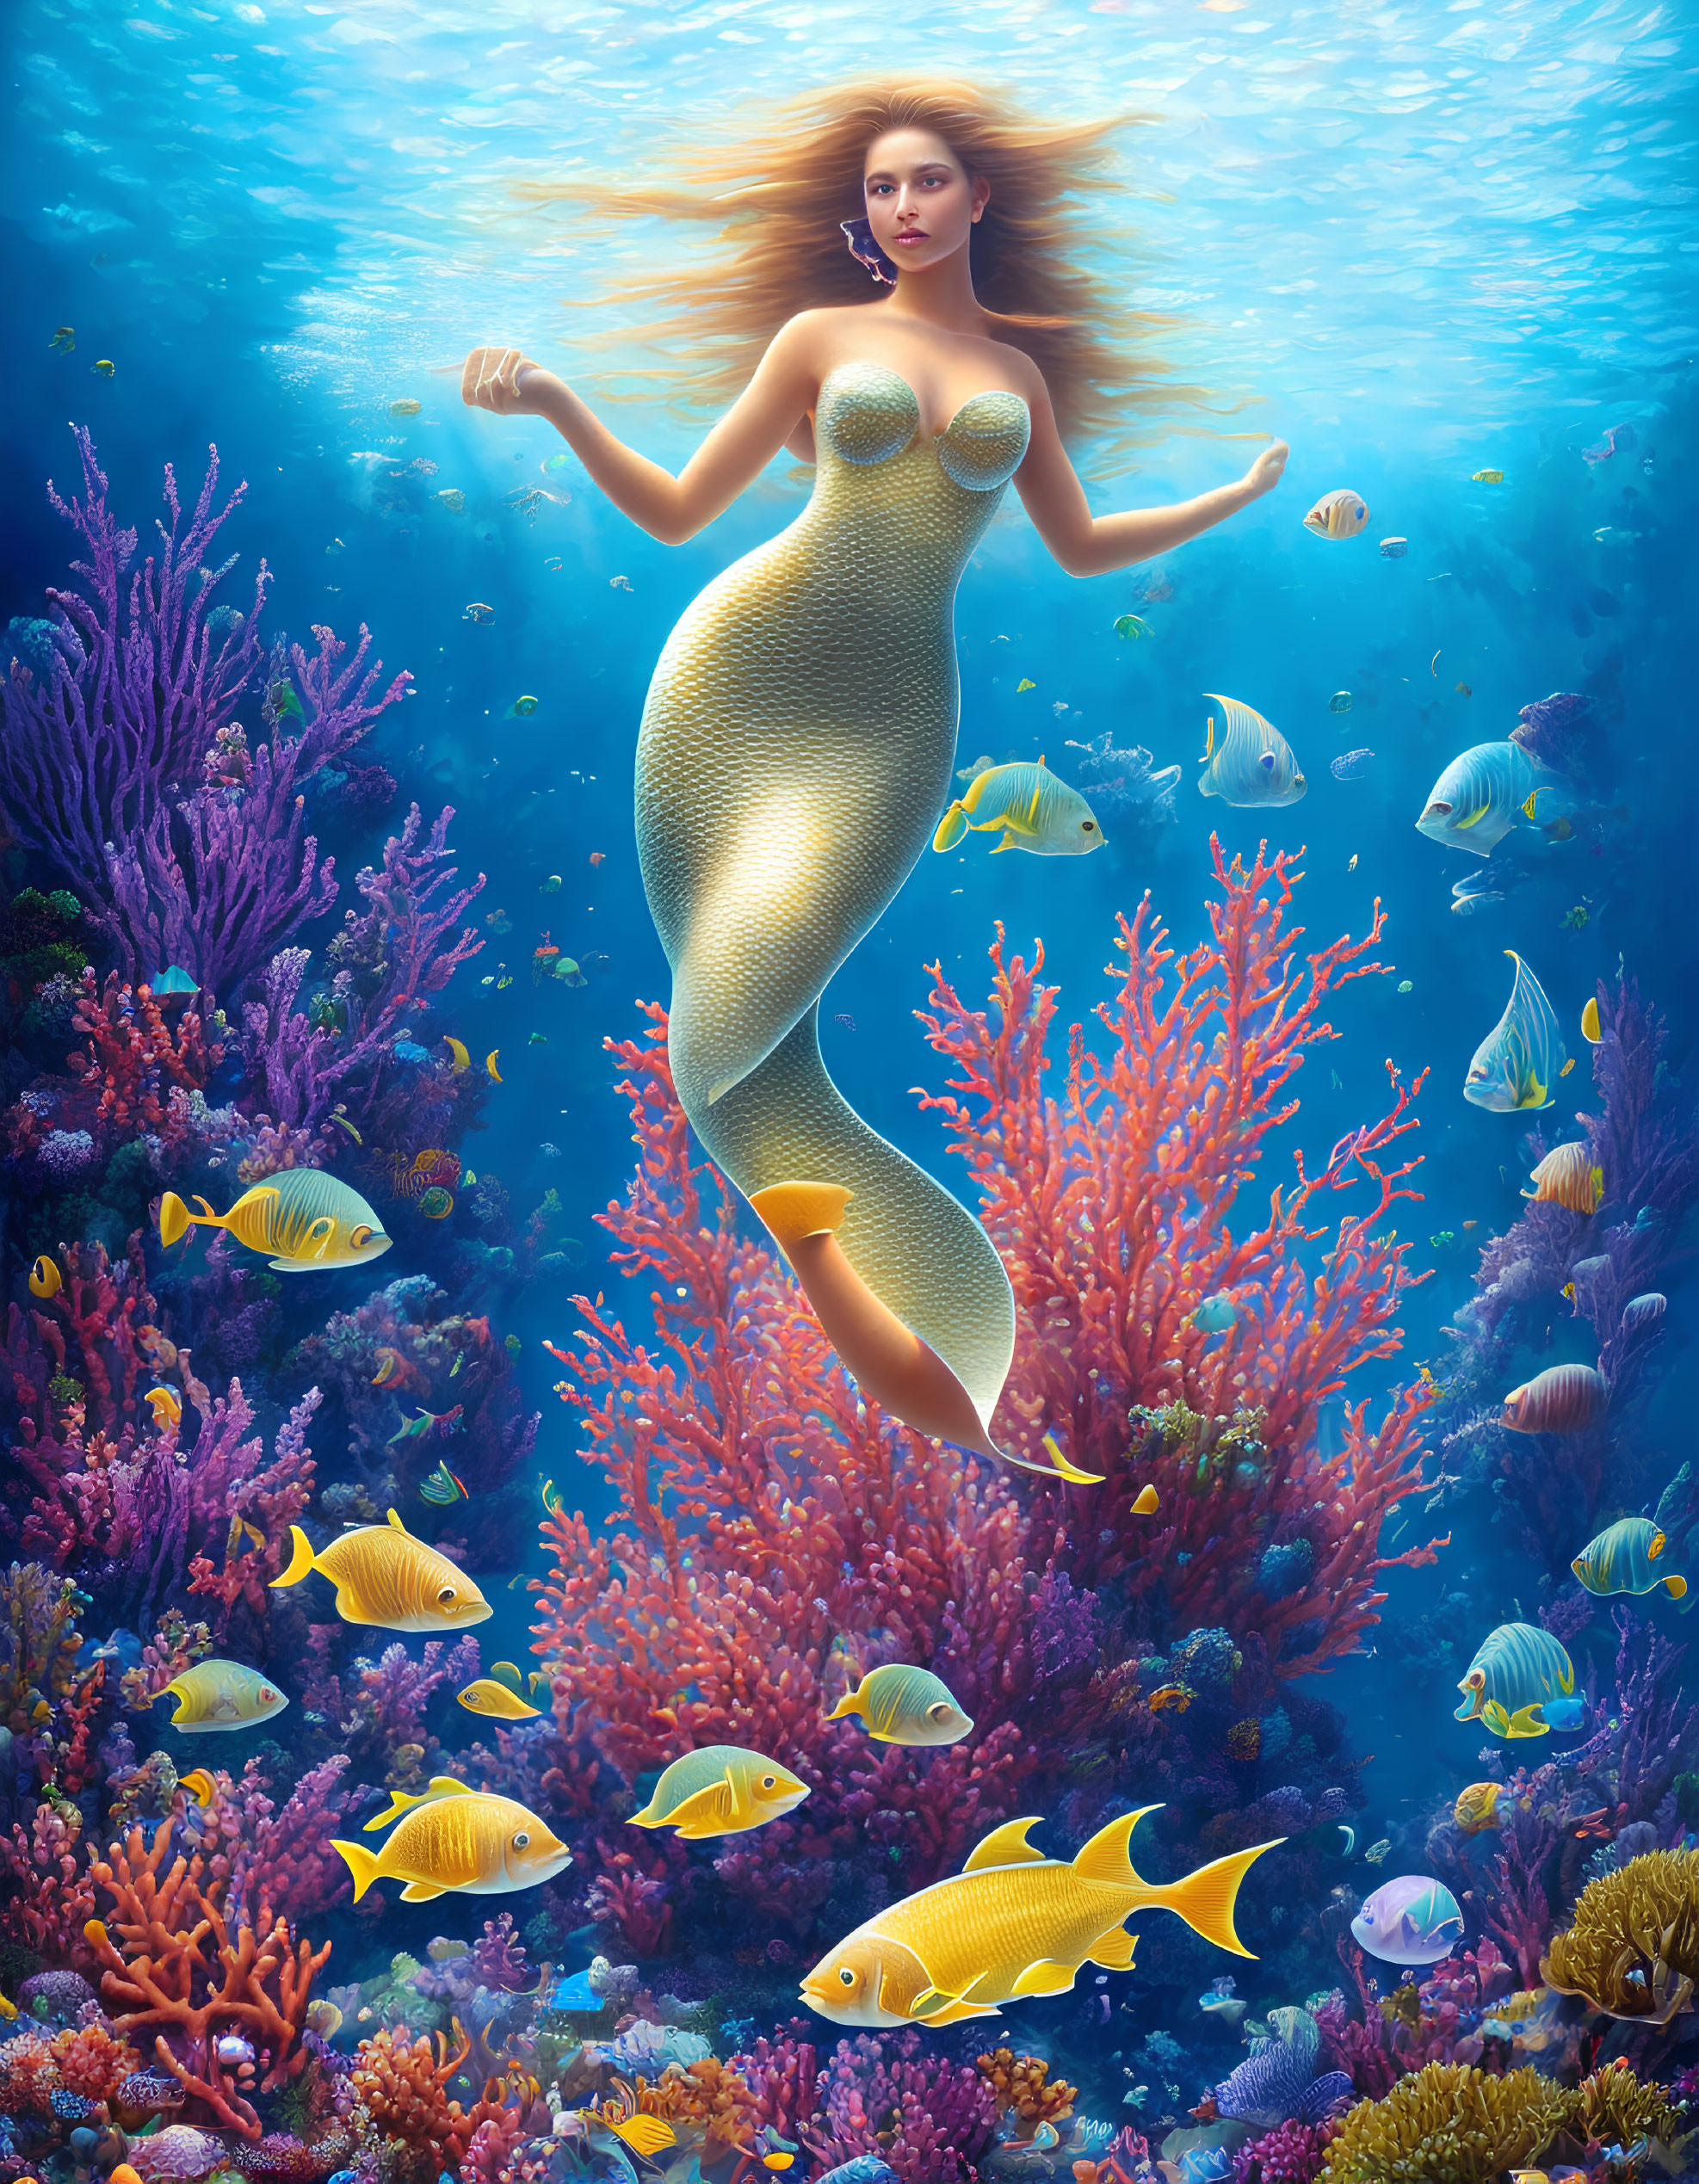 Mermaid with Long Flowing Hair Swimming Near Vibrant Coral Reefs